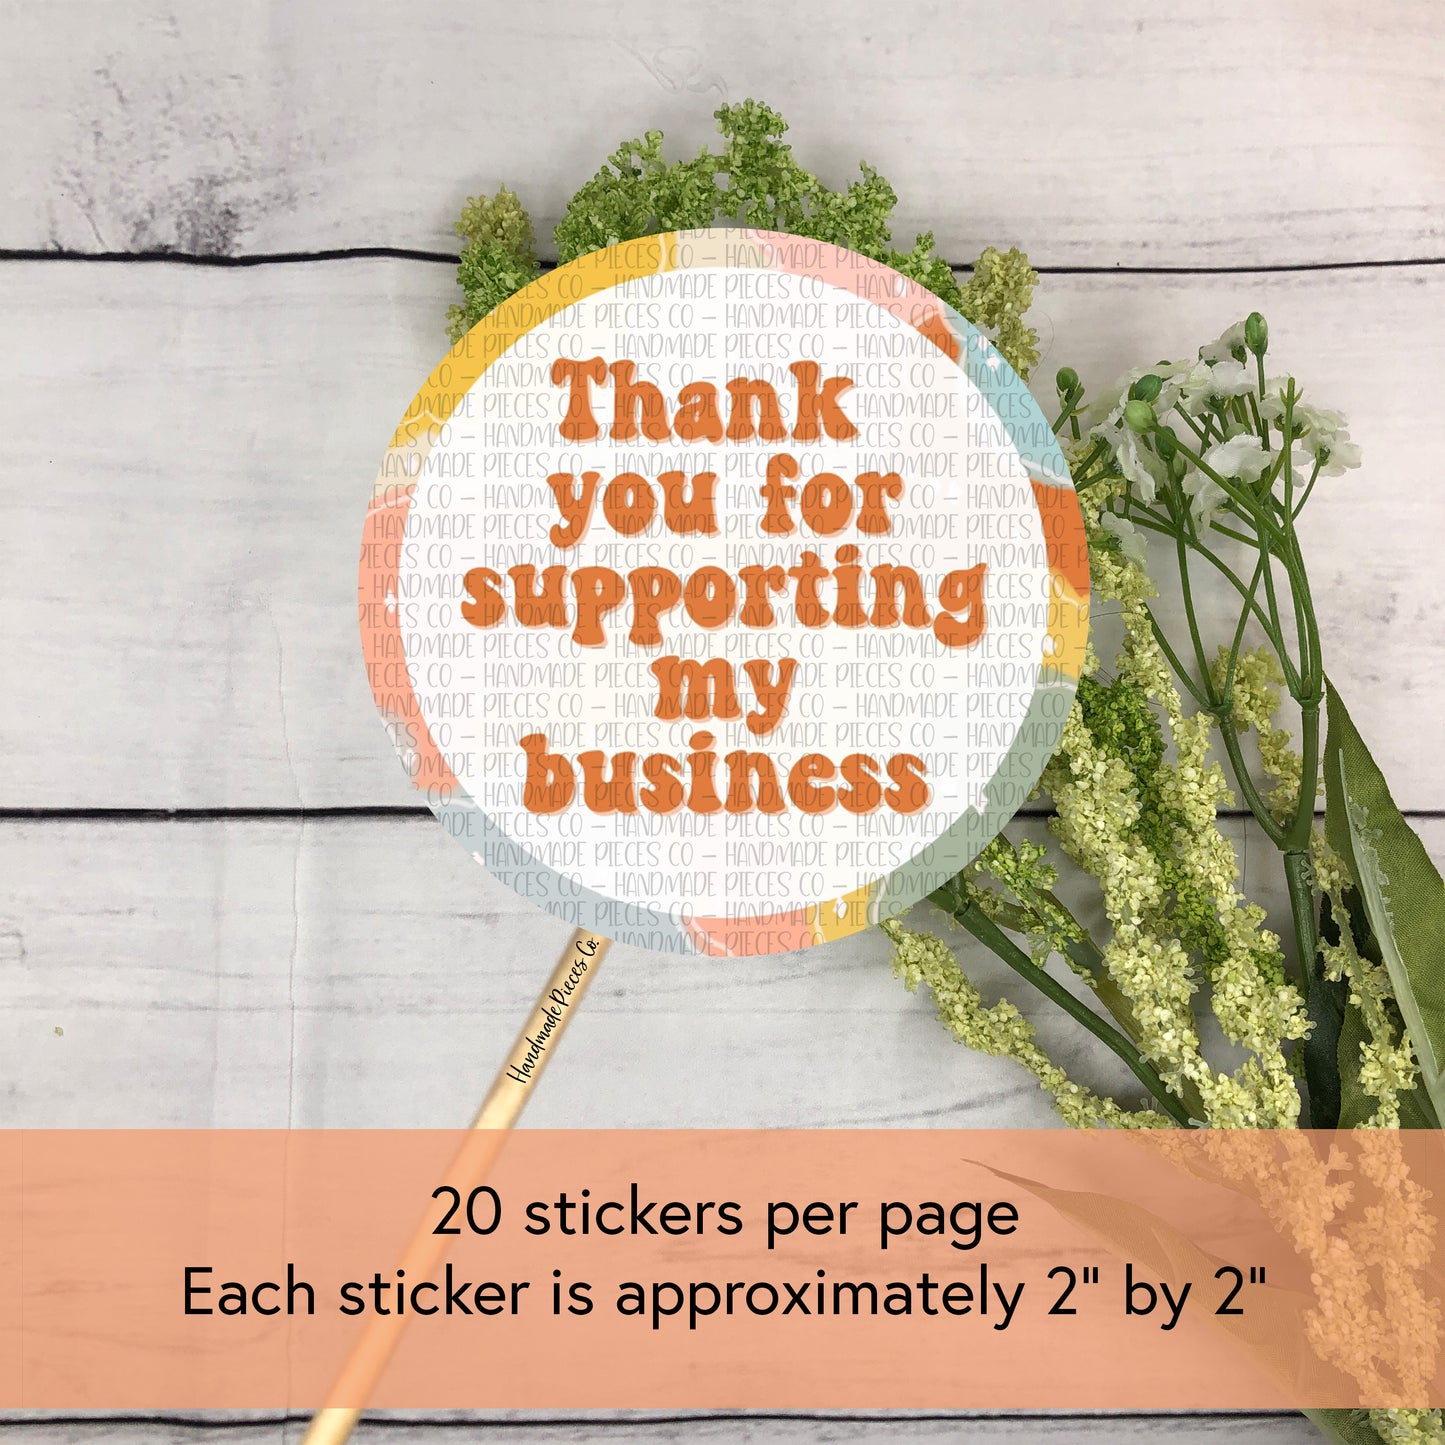 Thank You for Supporting my Business Packaging Sticker, Self Love Theme